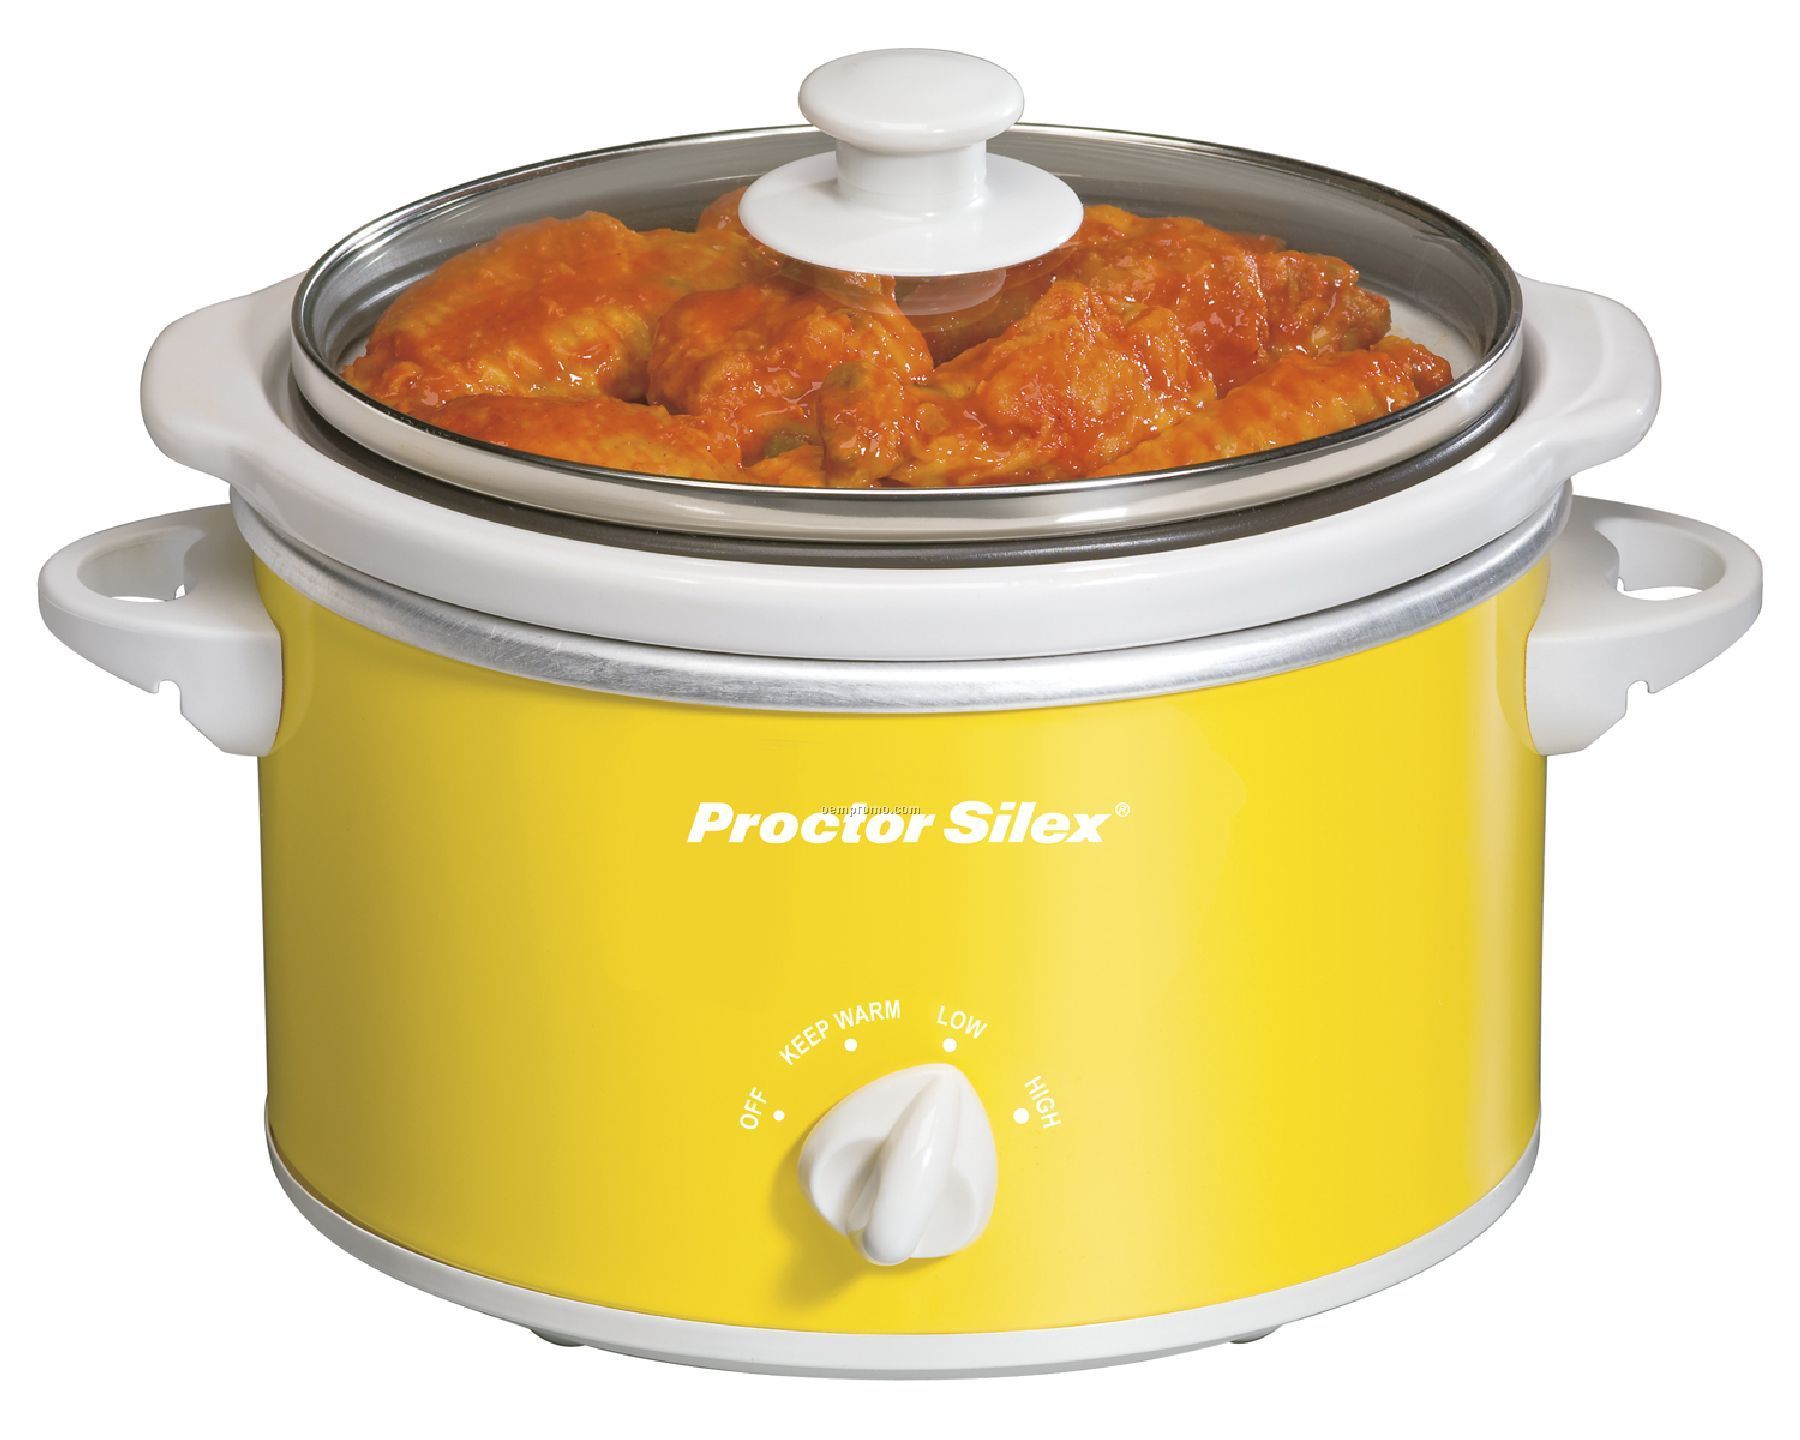 Proctor Silex - Slow Cookers - 1.5 Qt Oval Ltch Strp/Gsk -yllw